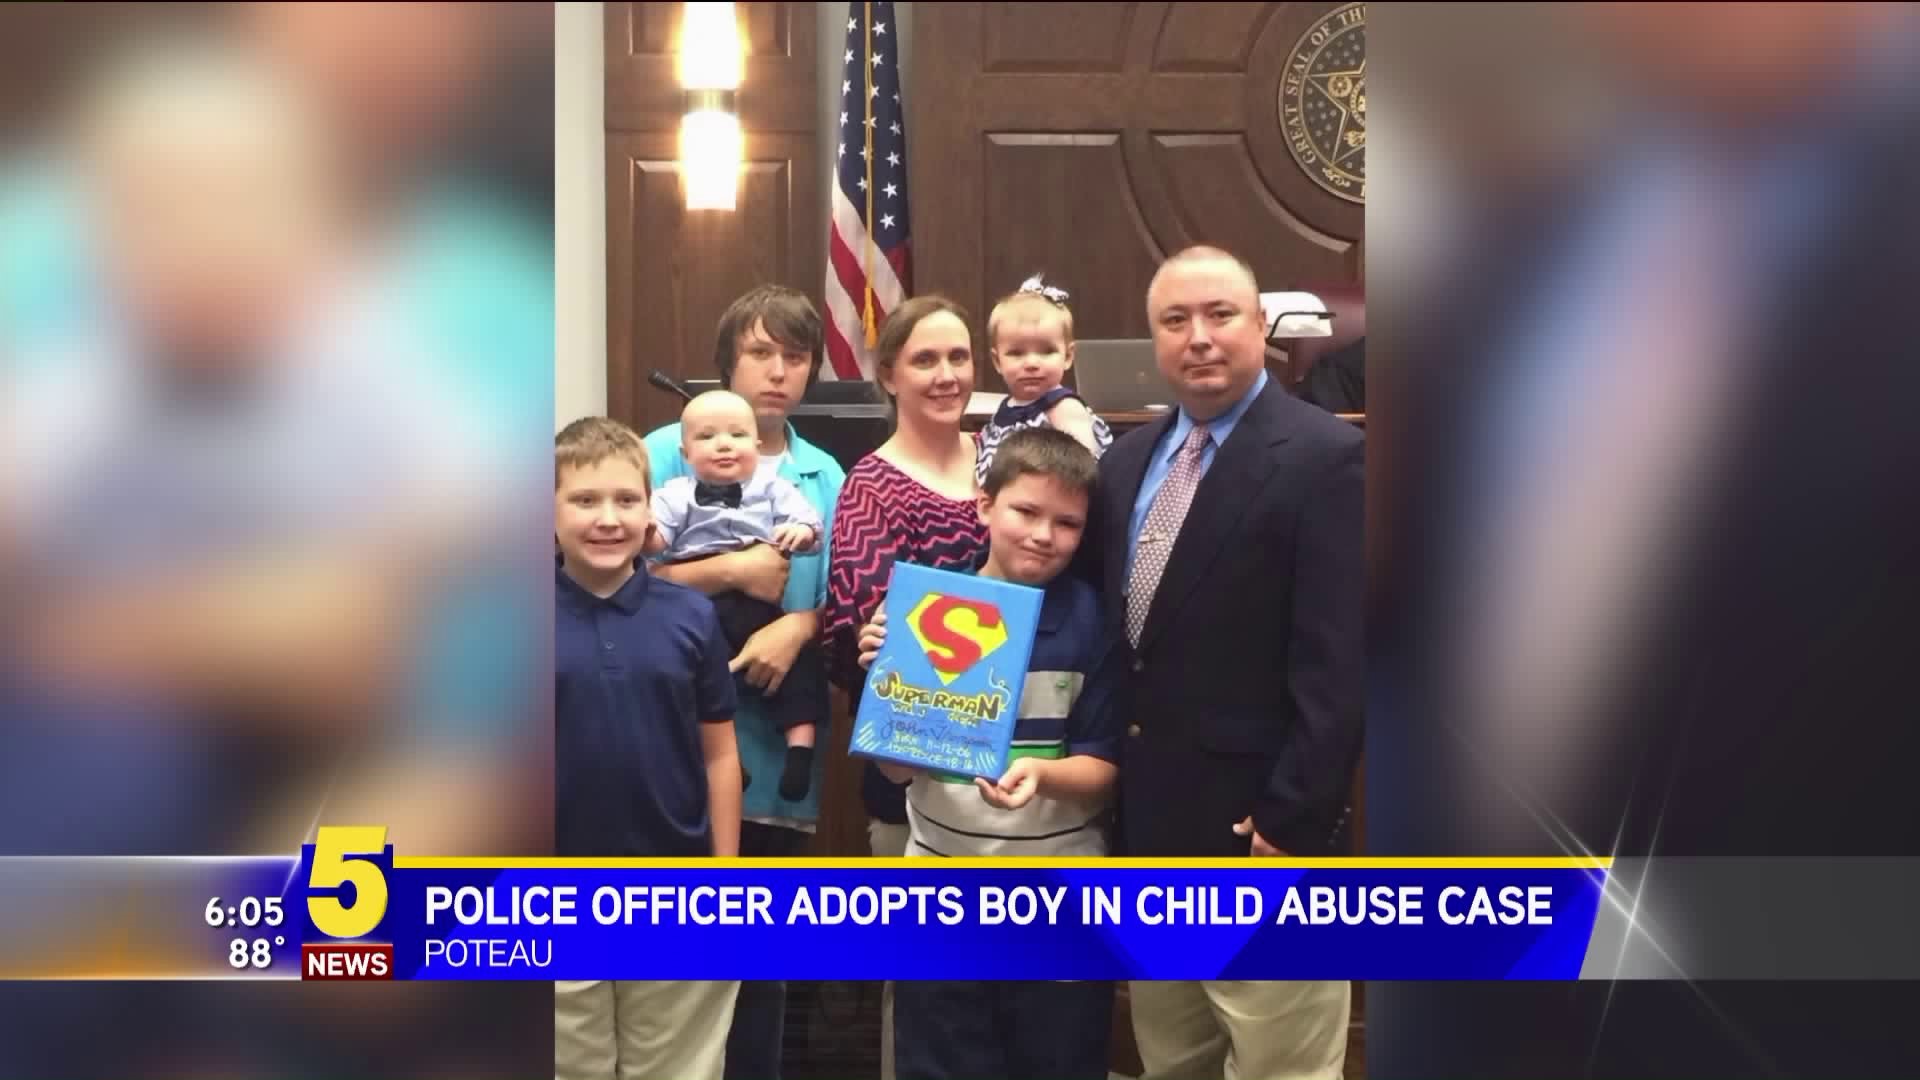 Police Officer Adopts Boy In Child Abuse Case